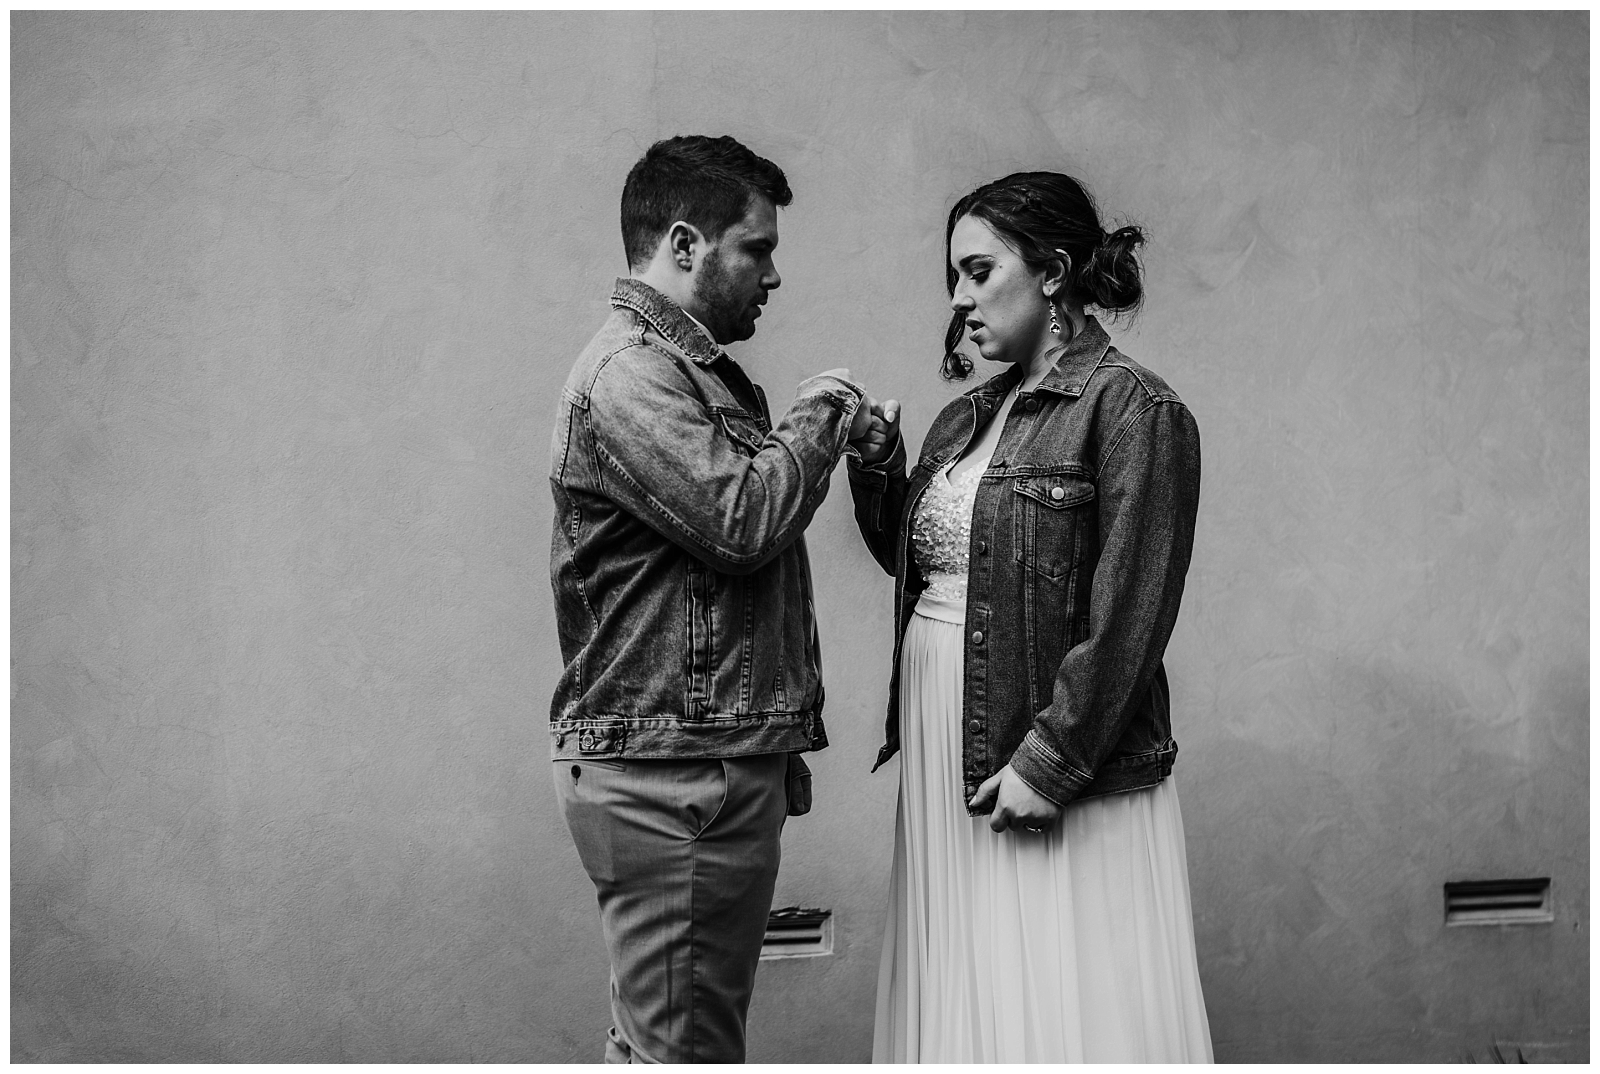 Bride and Groom in denim jackets stand facing each other doing fist bump in front of wall.